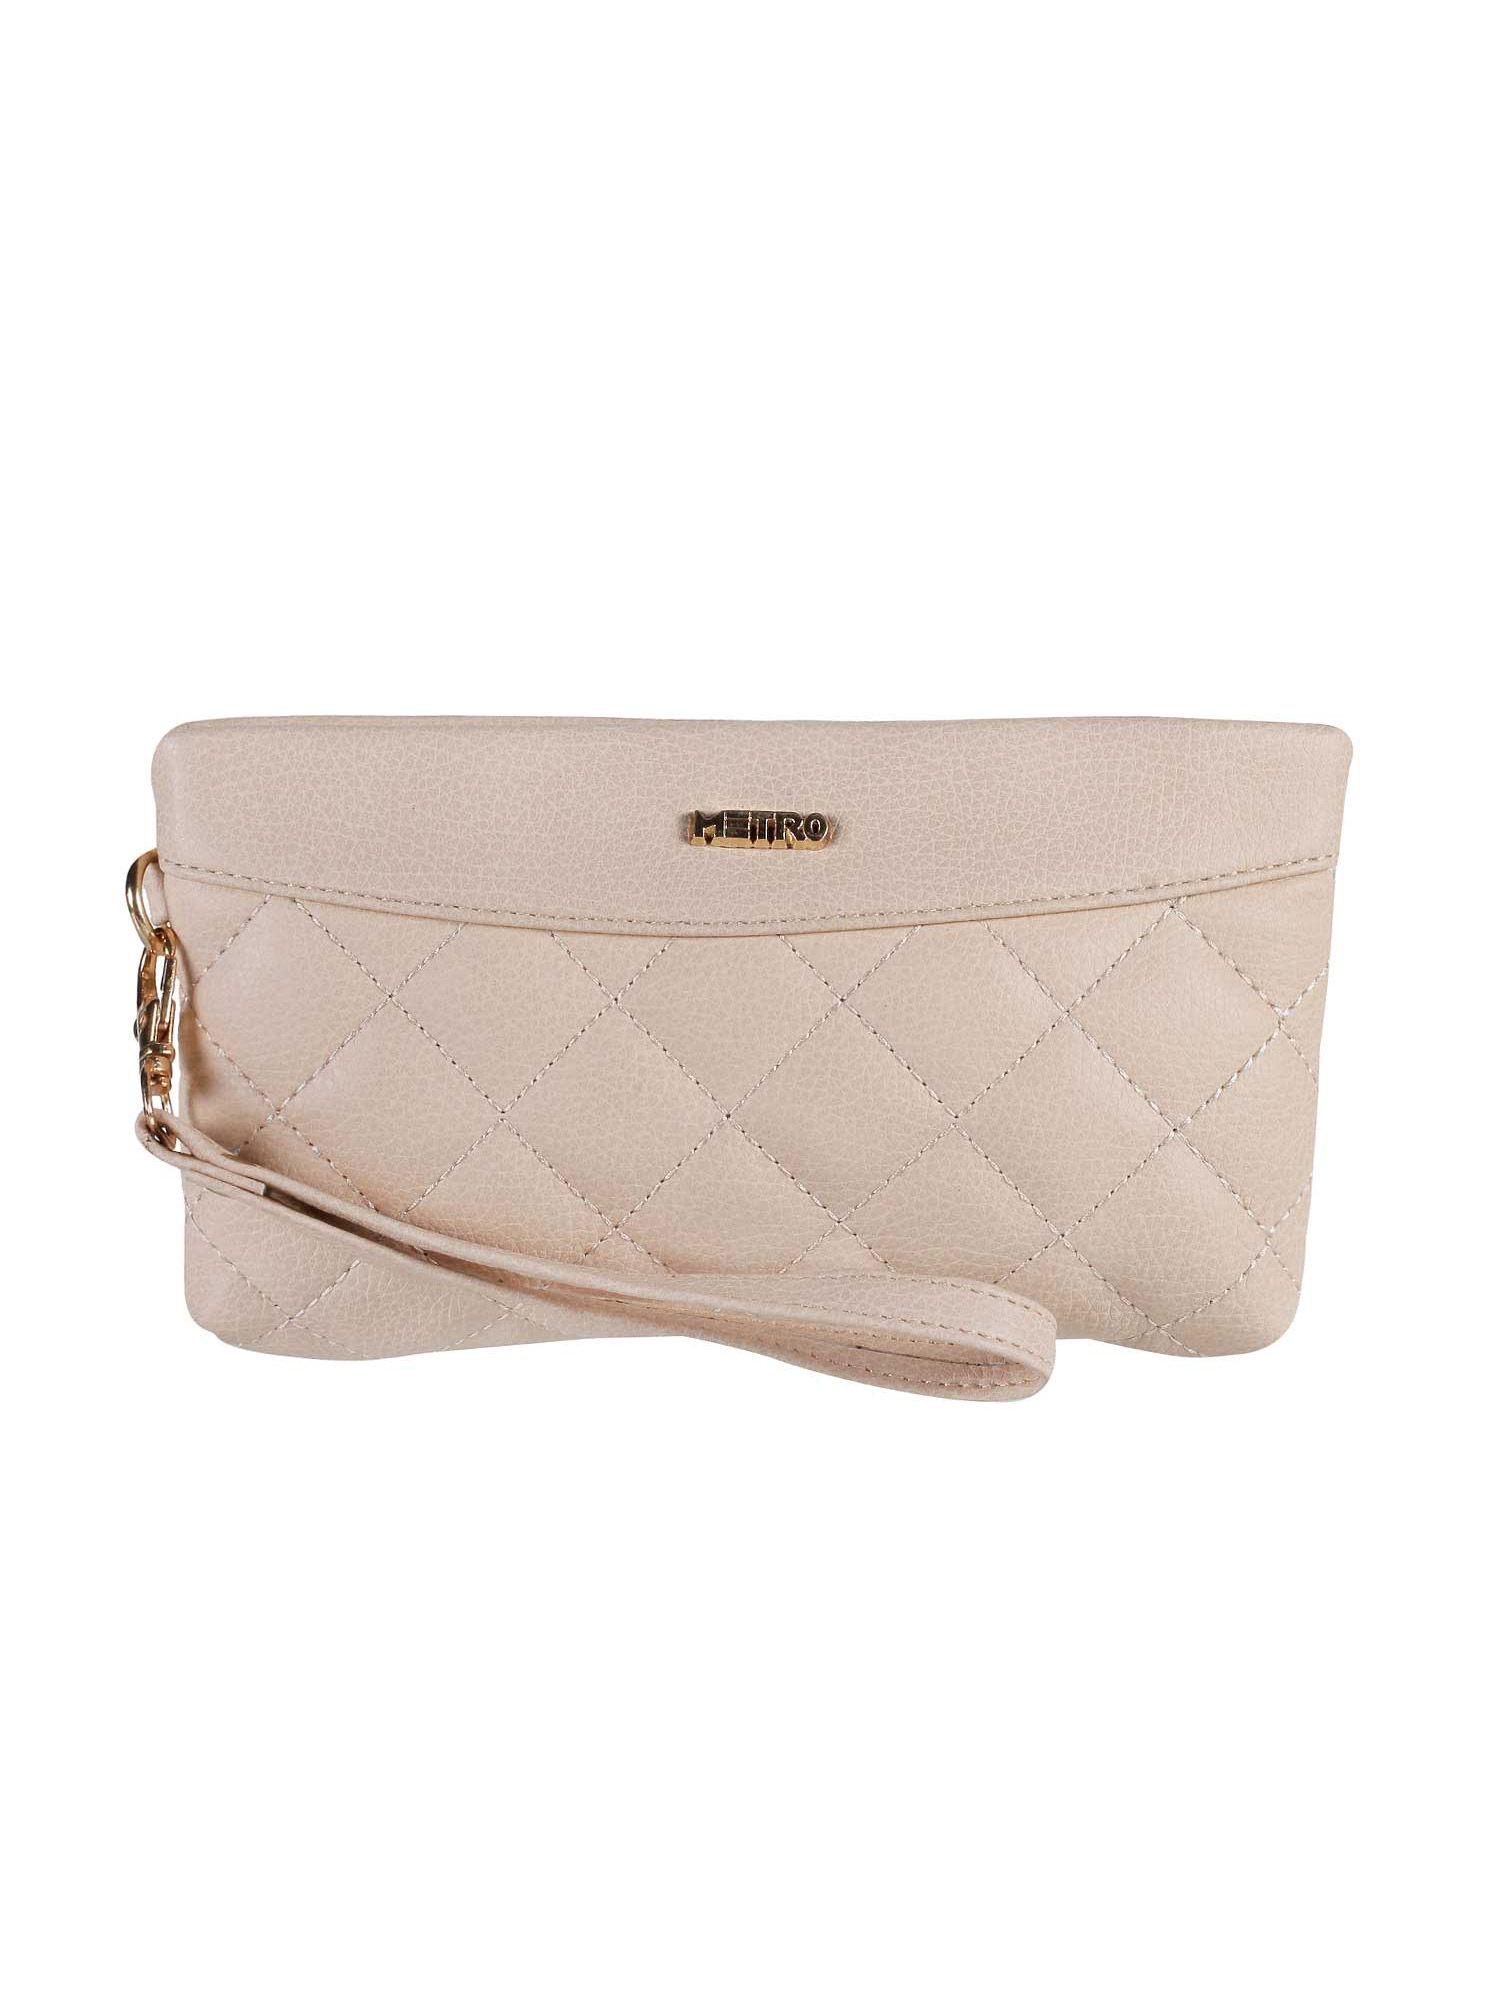 blush-pink-solid-leather-pouch